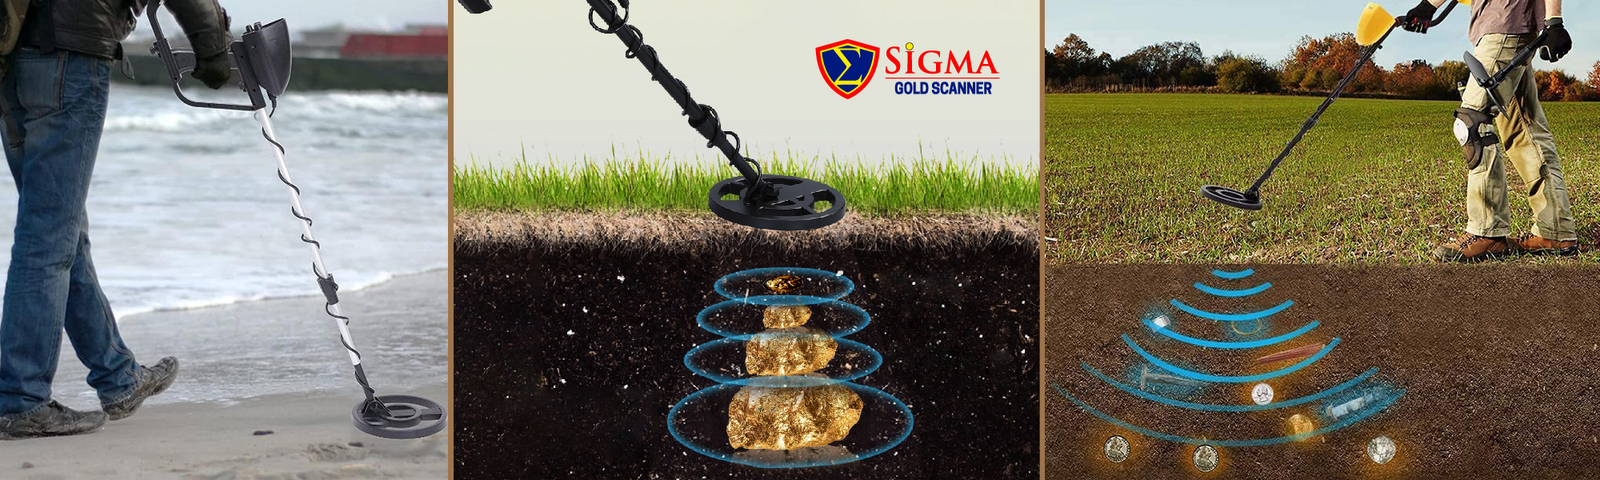 Products-Gold Scanner-Sigma - Kigali Smart Solution and security equipment in Kigali